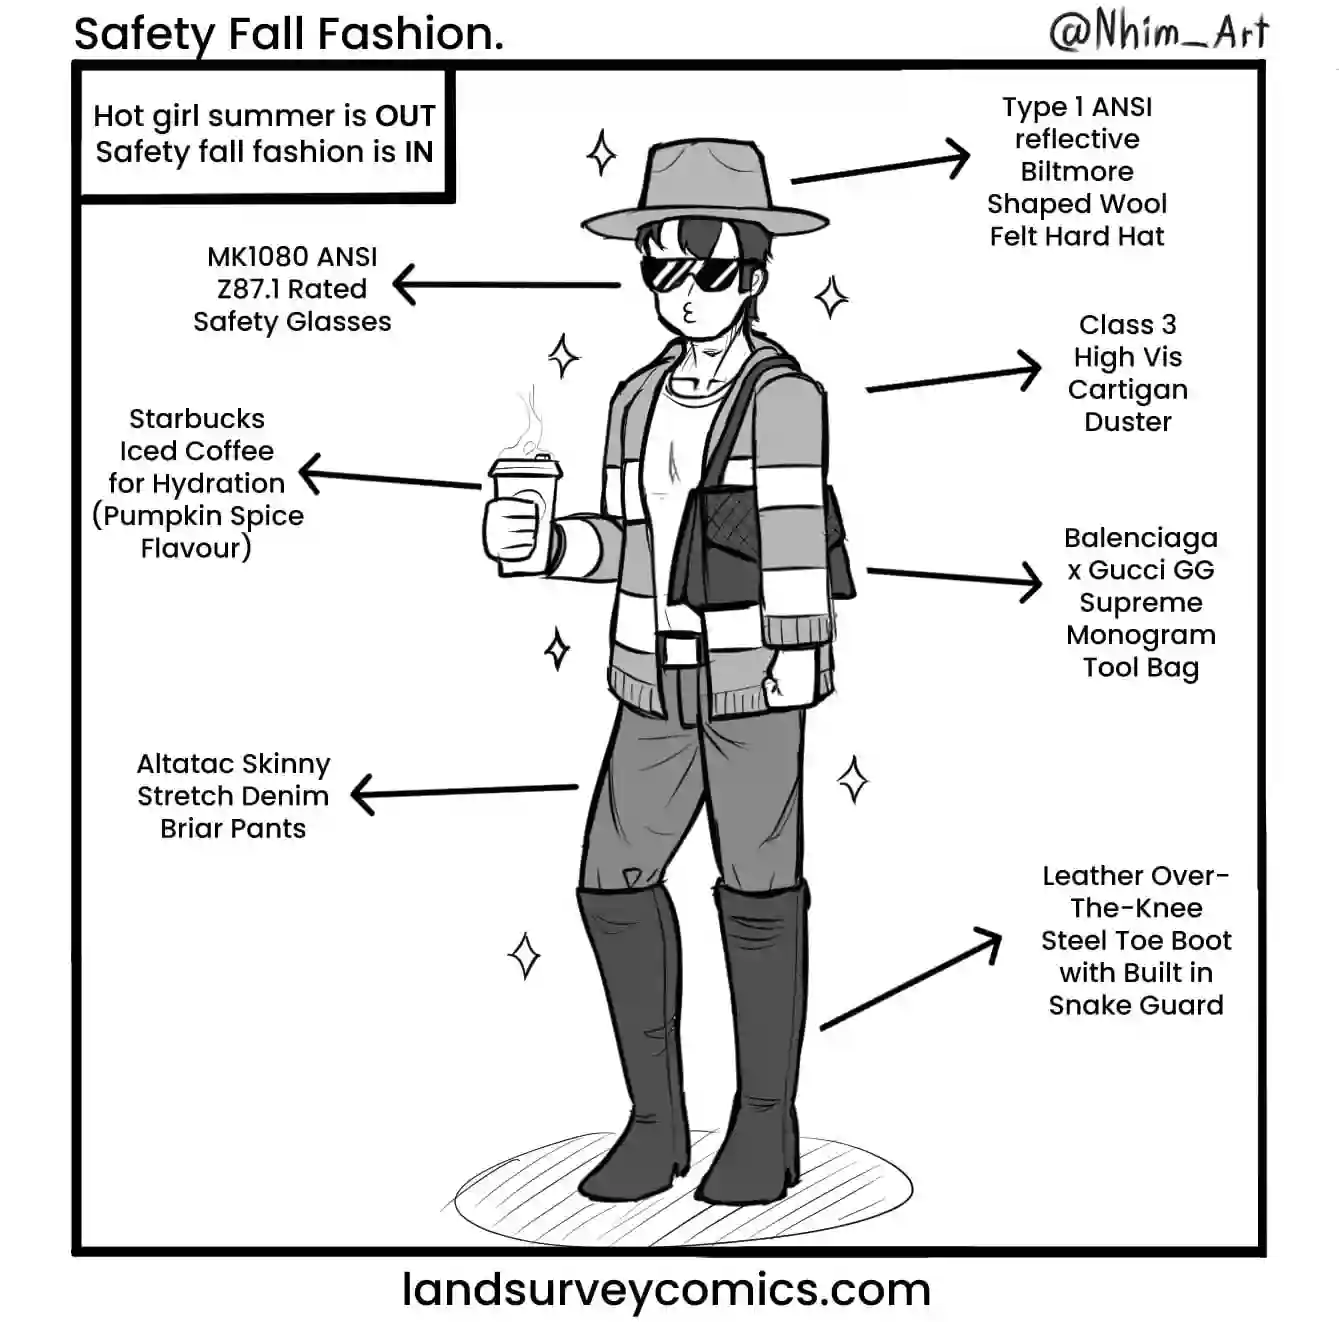 Safety Fall Fashion1.png